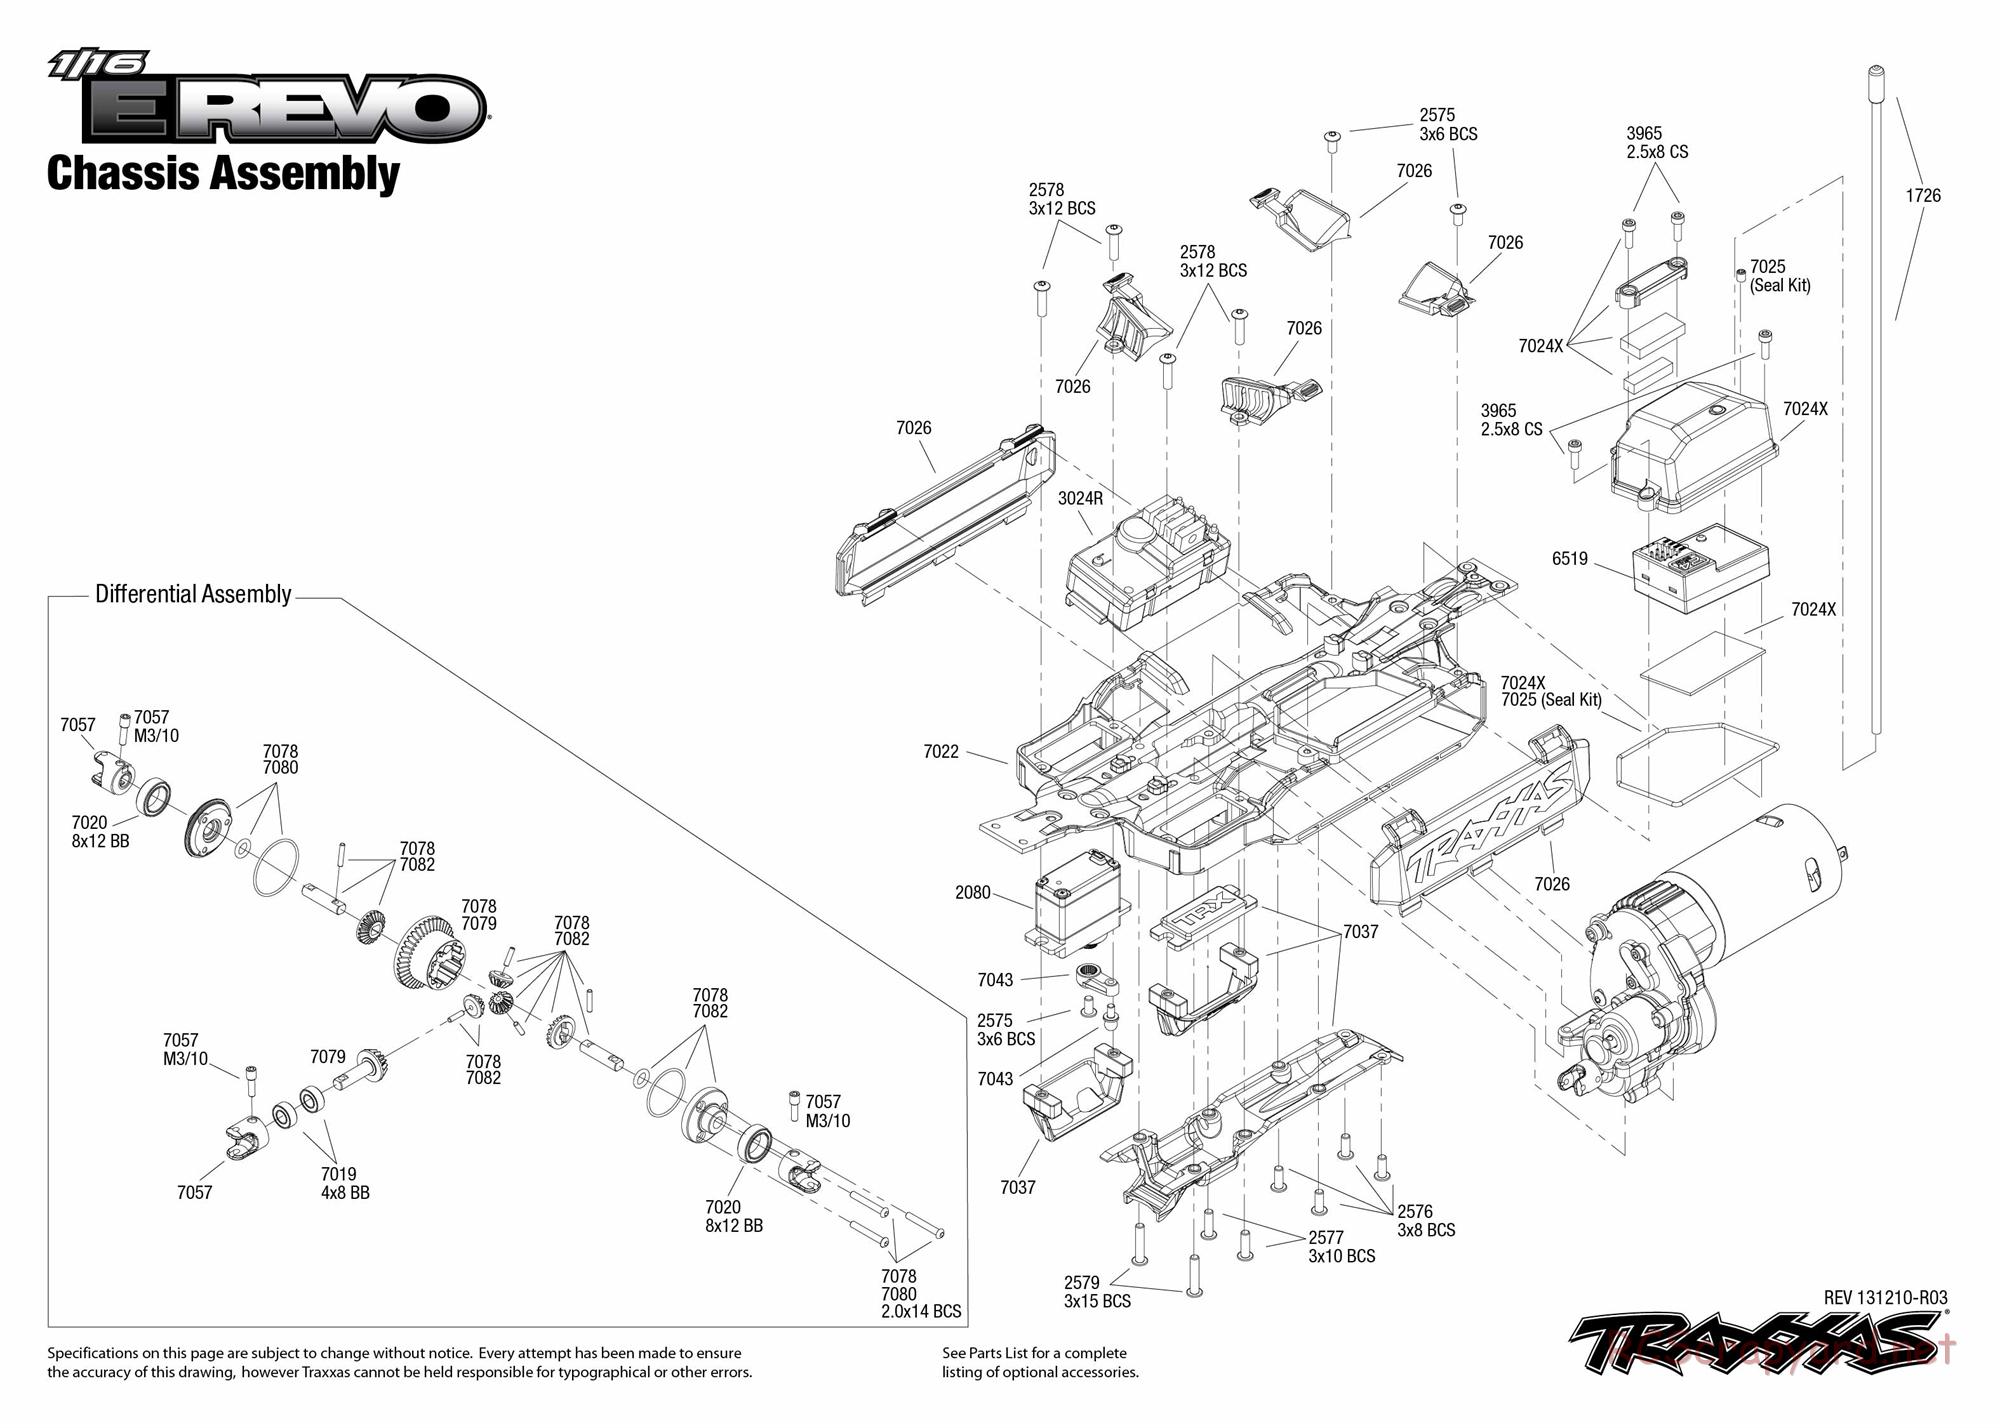 Traxxas - 1/16 E-Revo Brushed (2013) - Exploded Views - Page 1